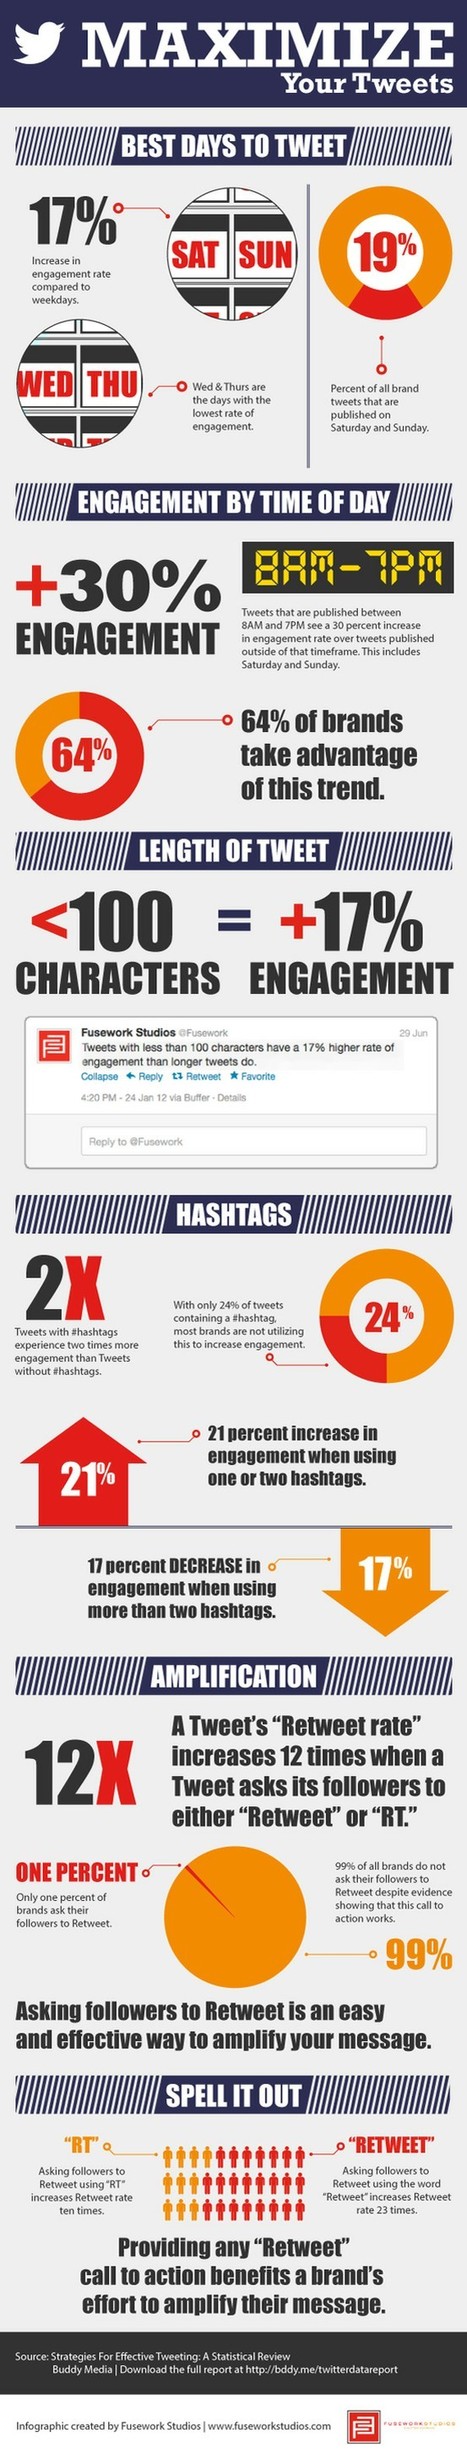 Twitter: How to optimize your tweets to increase engagement... | Geeks | Scoop.it